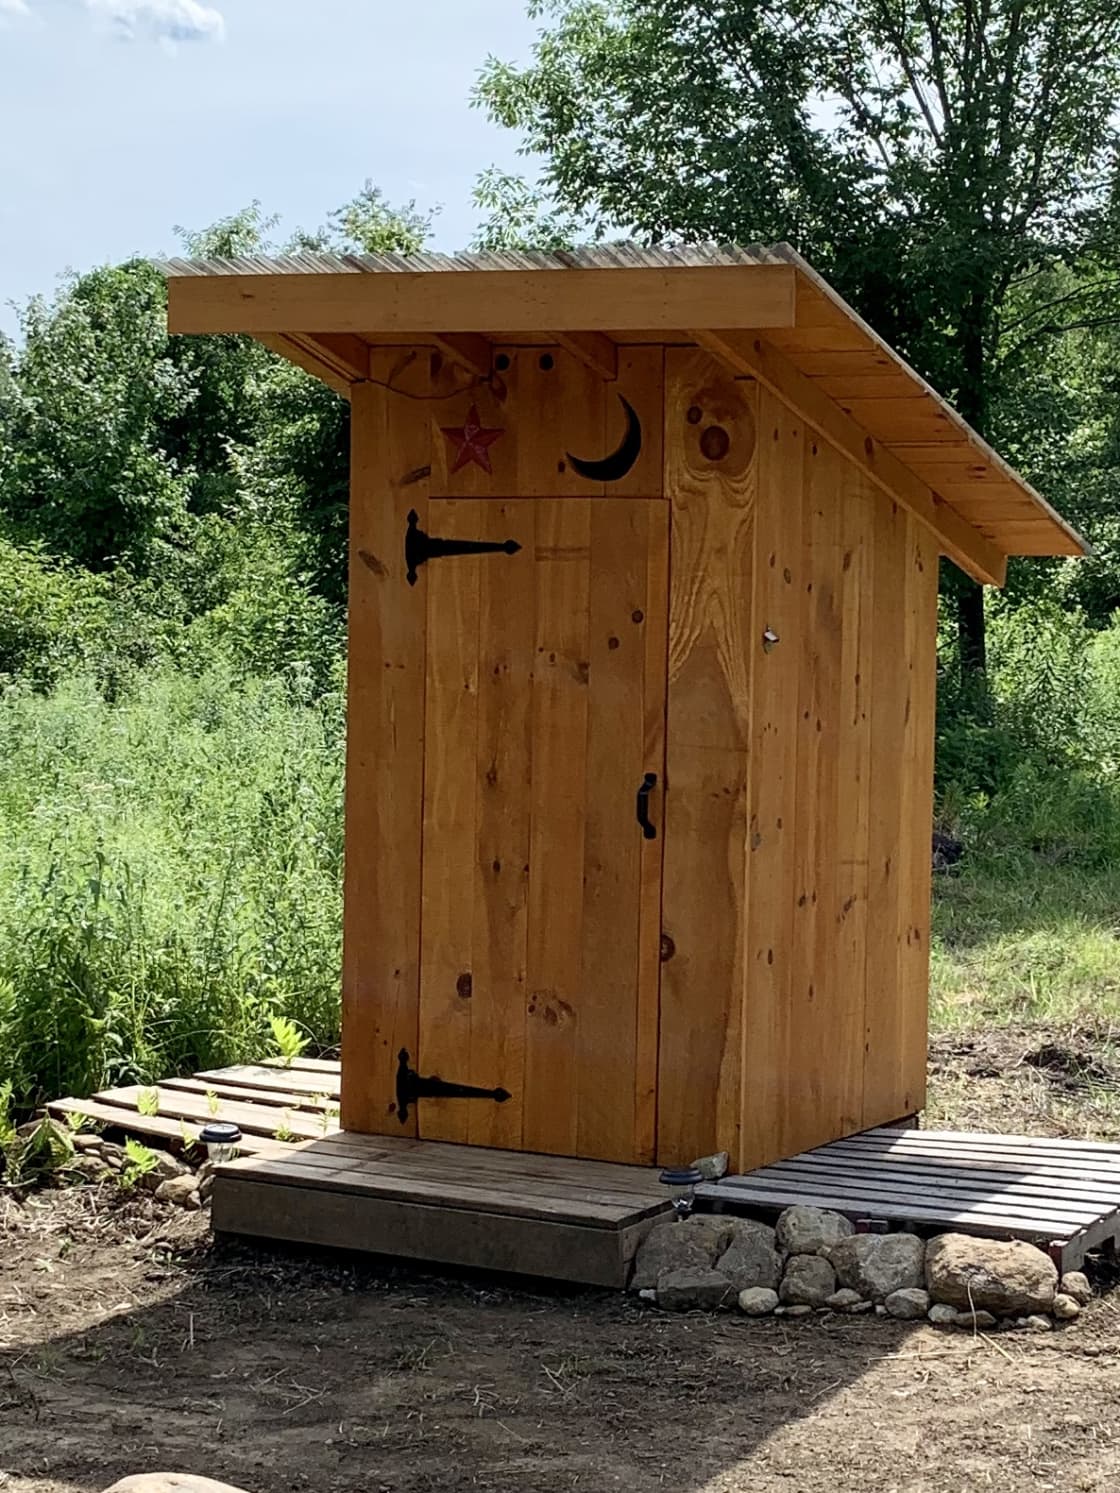 We built an outhouse July 2020. Our old farmhouse has an outhouse and we thought it fitting that our camp should have one also!